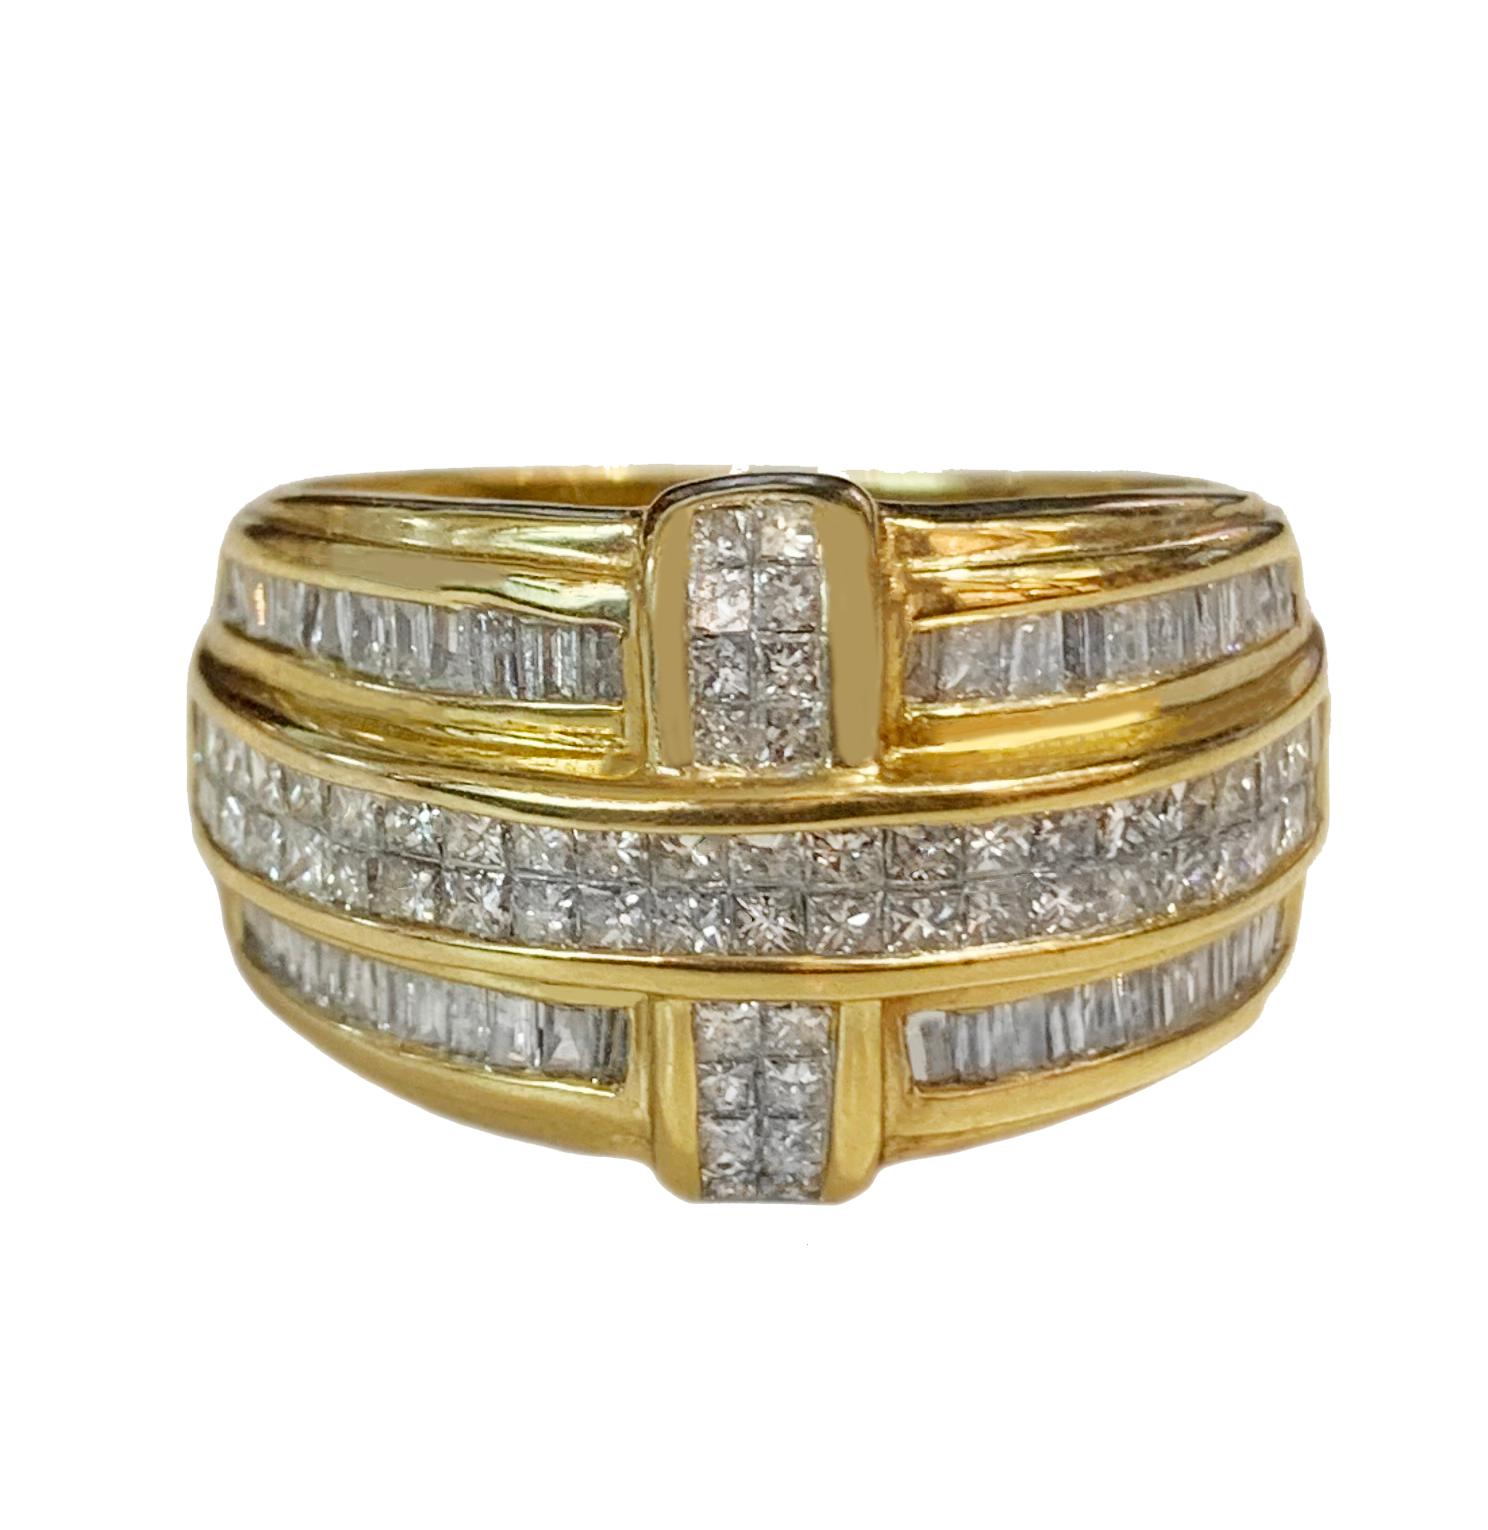 -Custom made

-14k Yellow gold

-Ring size: 11

-Weight: 9.4gr

-Ring width: 0.2-0.6”

-Diamond: 2.75ct, VS clarity, G color